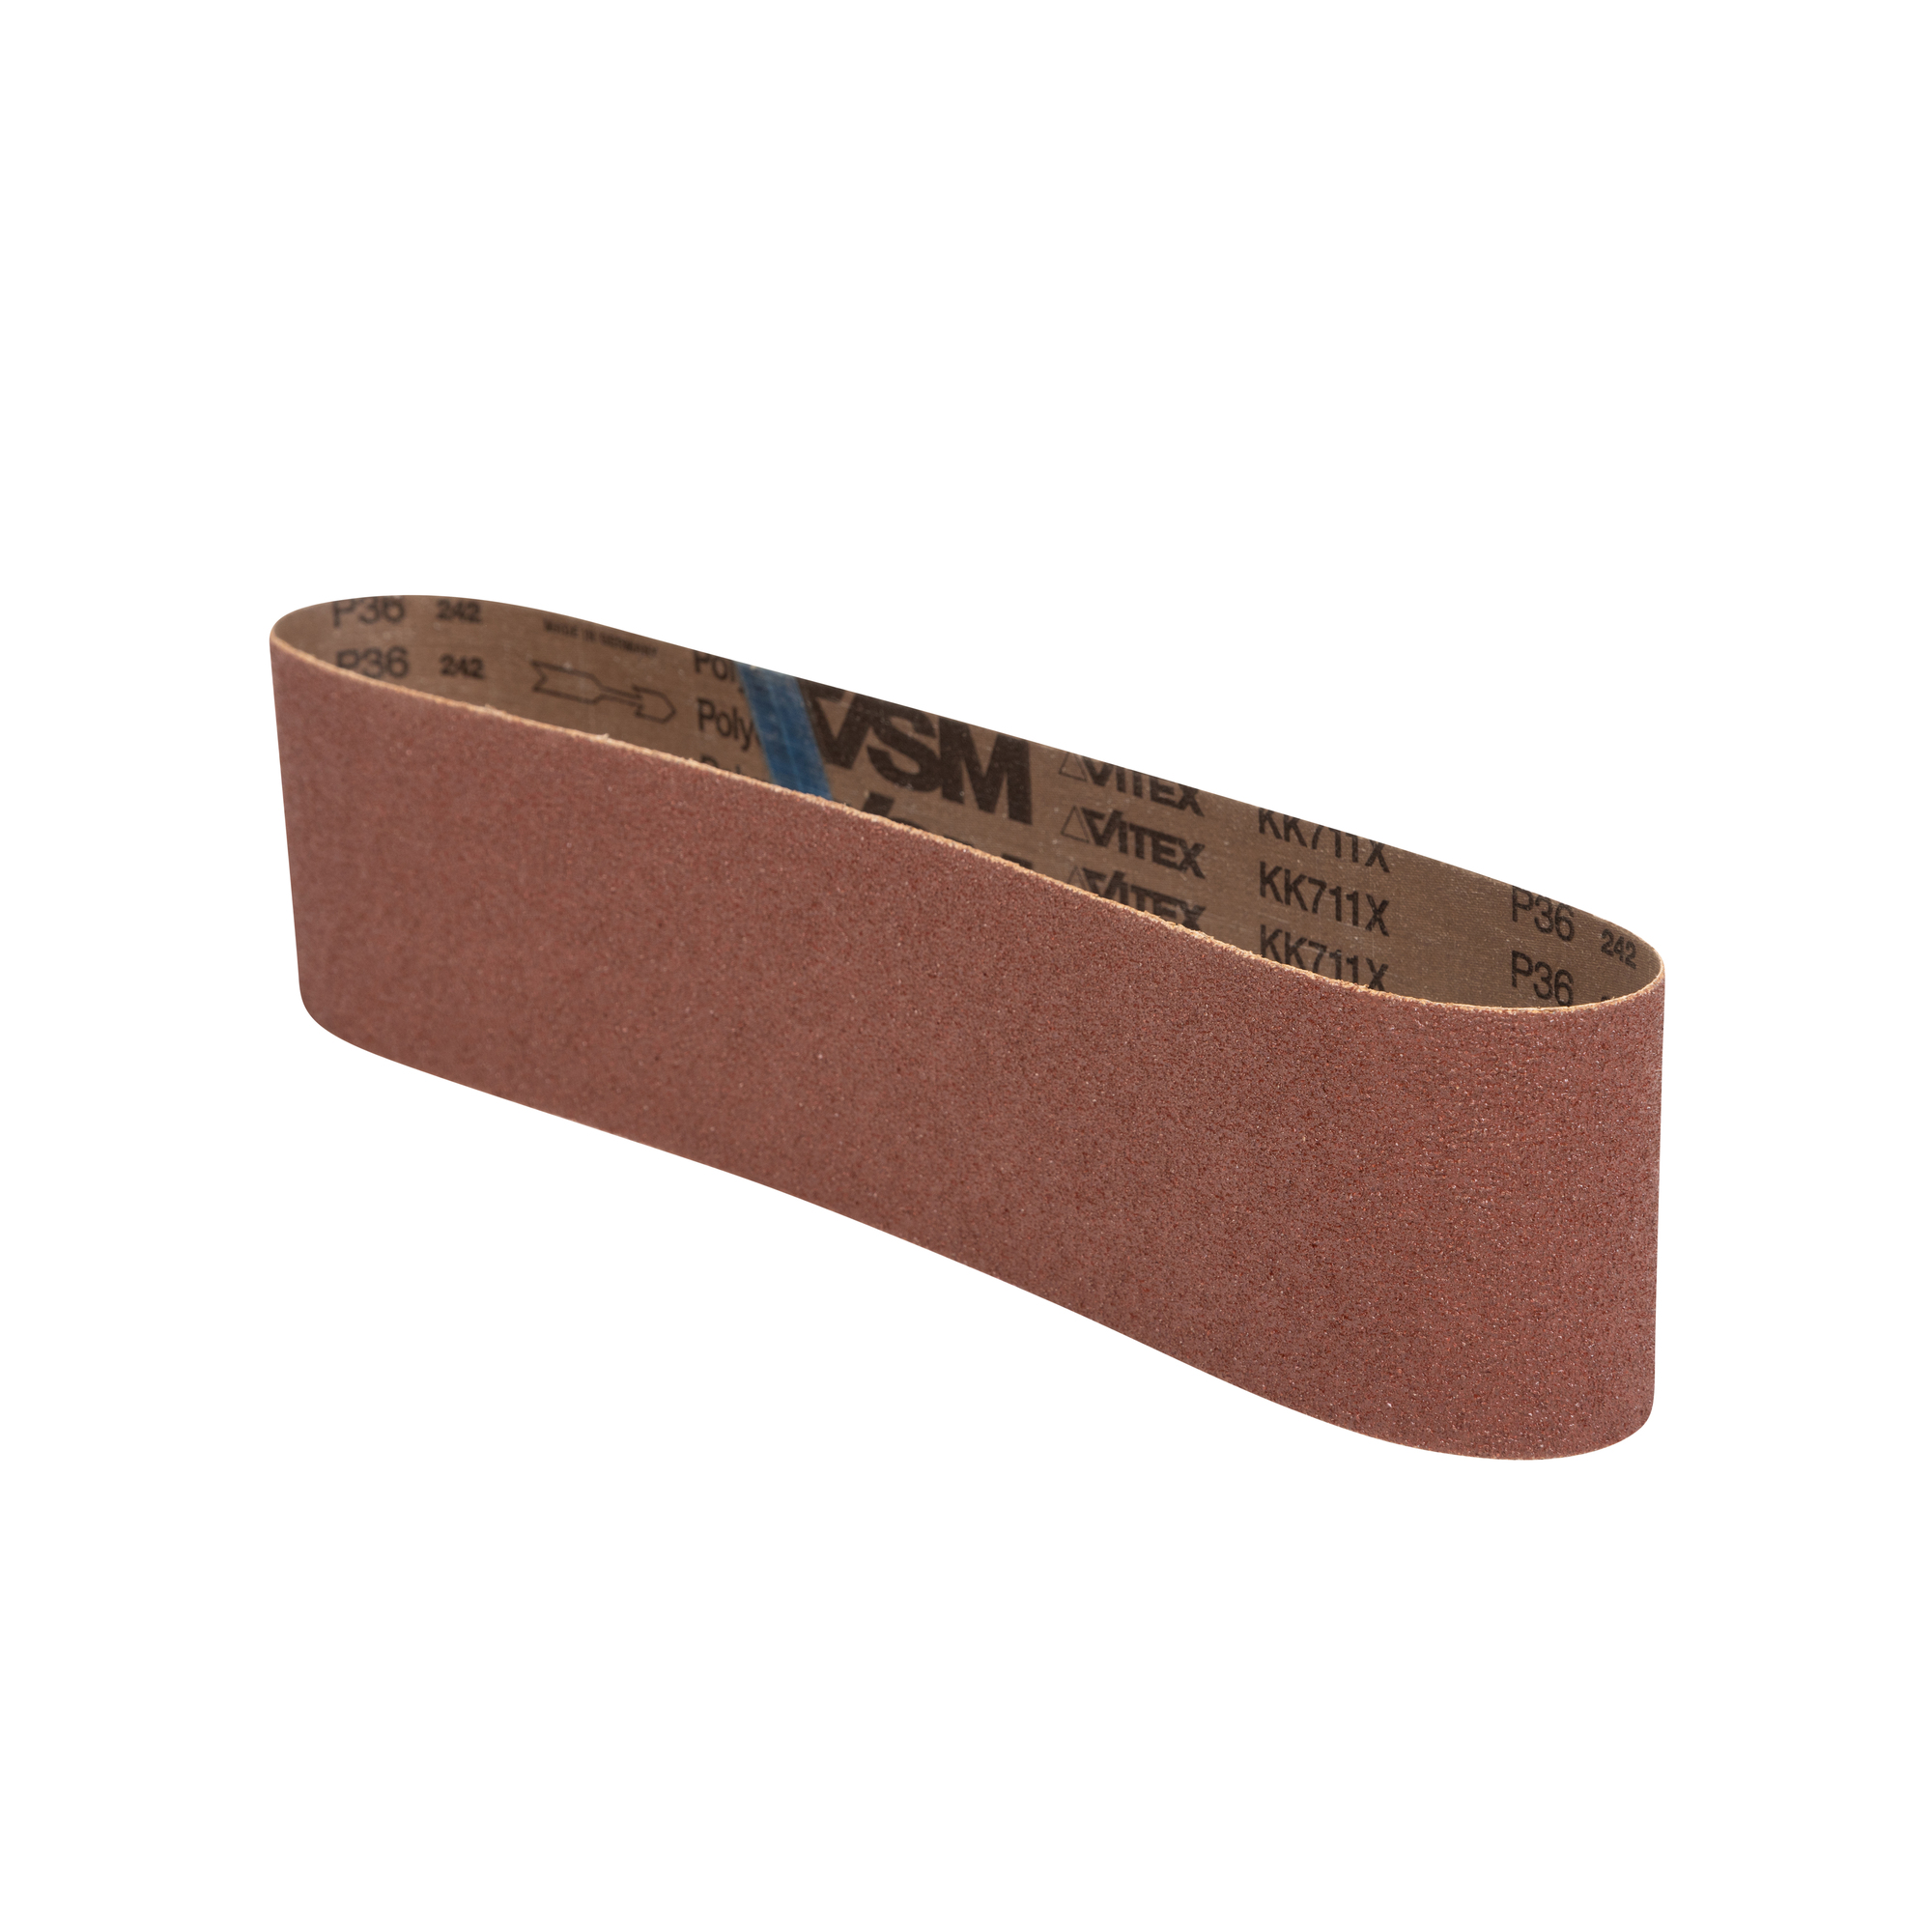 JET, Sand Paper, Pieces (qty.) 3 Grit 50 Length 36 in, Model 577540